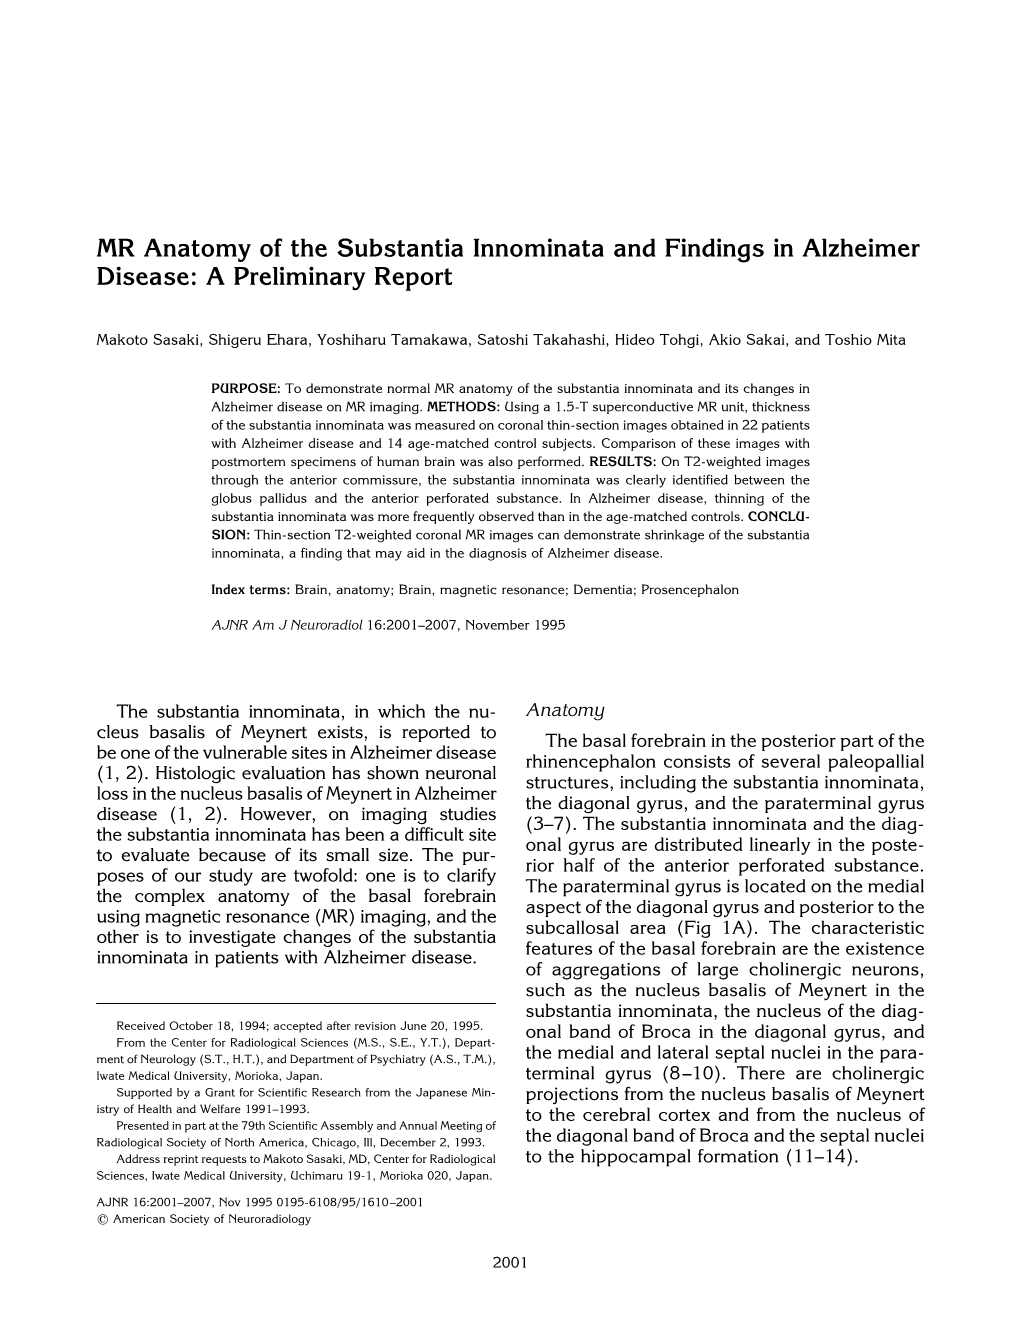 MR Anatomy of the Substantia Innominata and Findings in Alzheimer Disease: a Preliminary Report